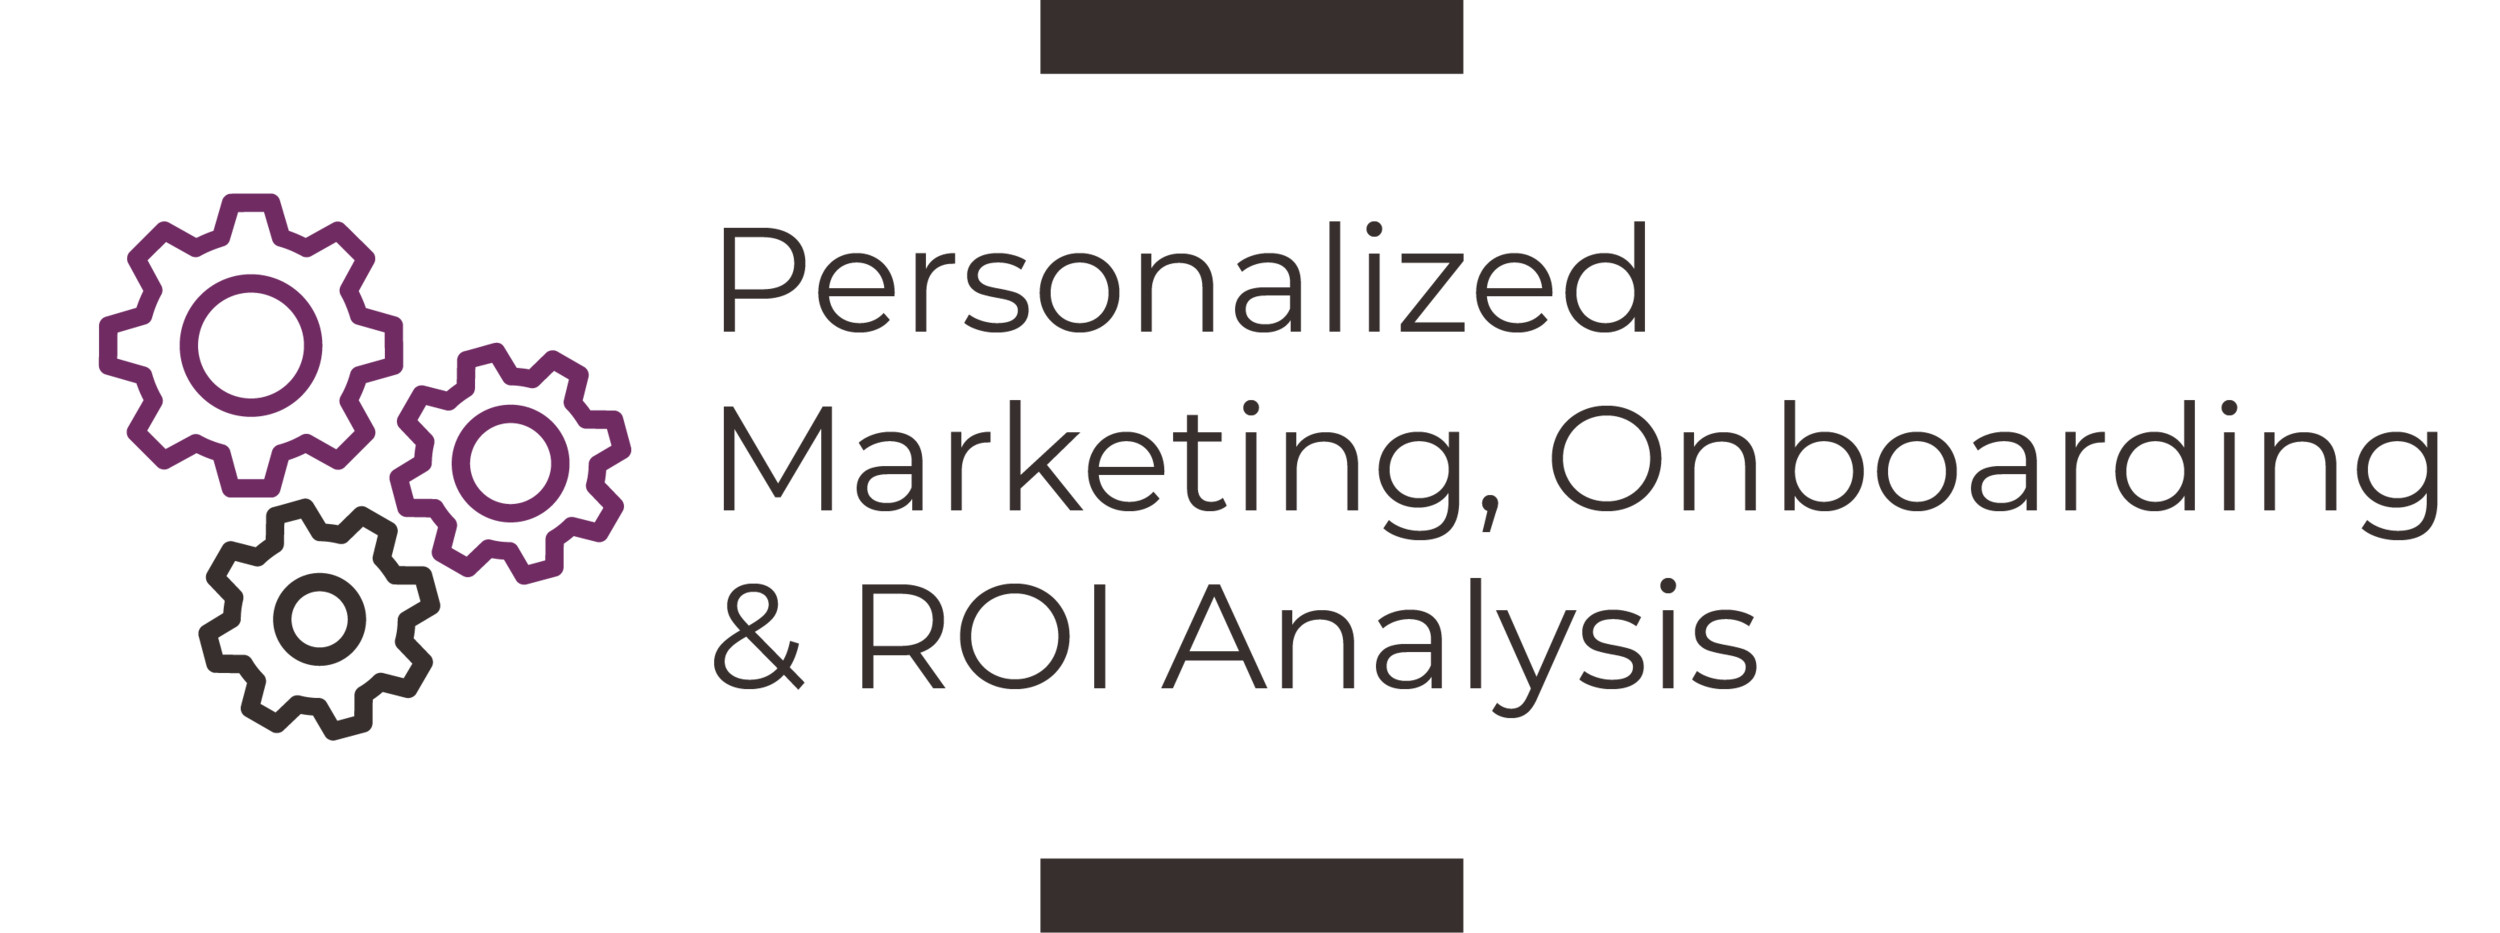 Personalized Marketing, Onboarding &amp; ROI Analysis